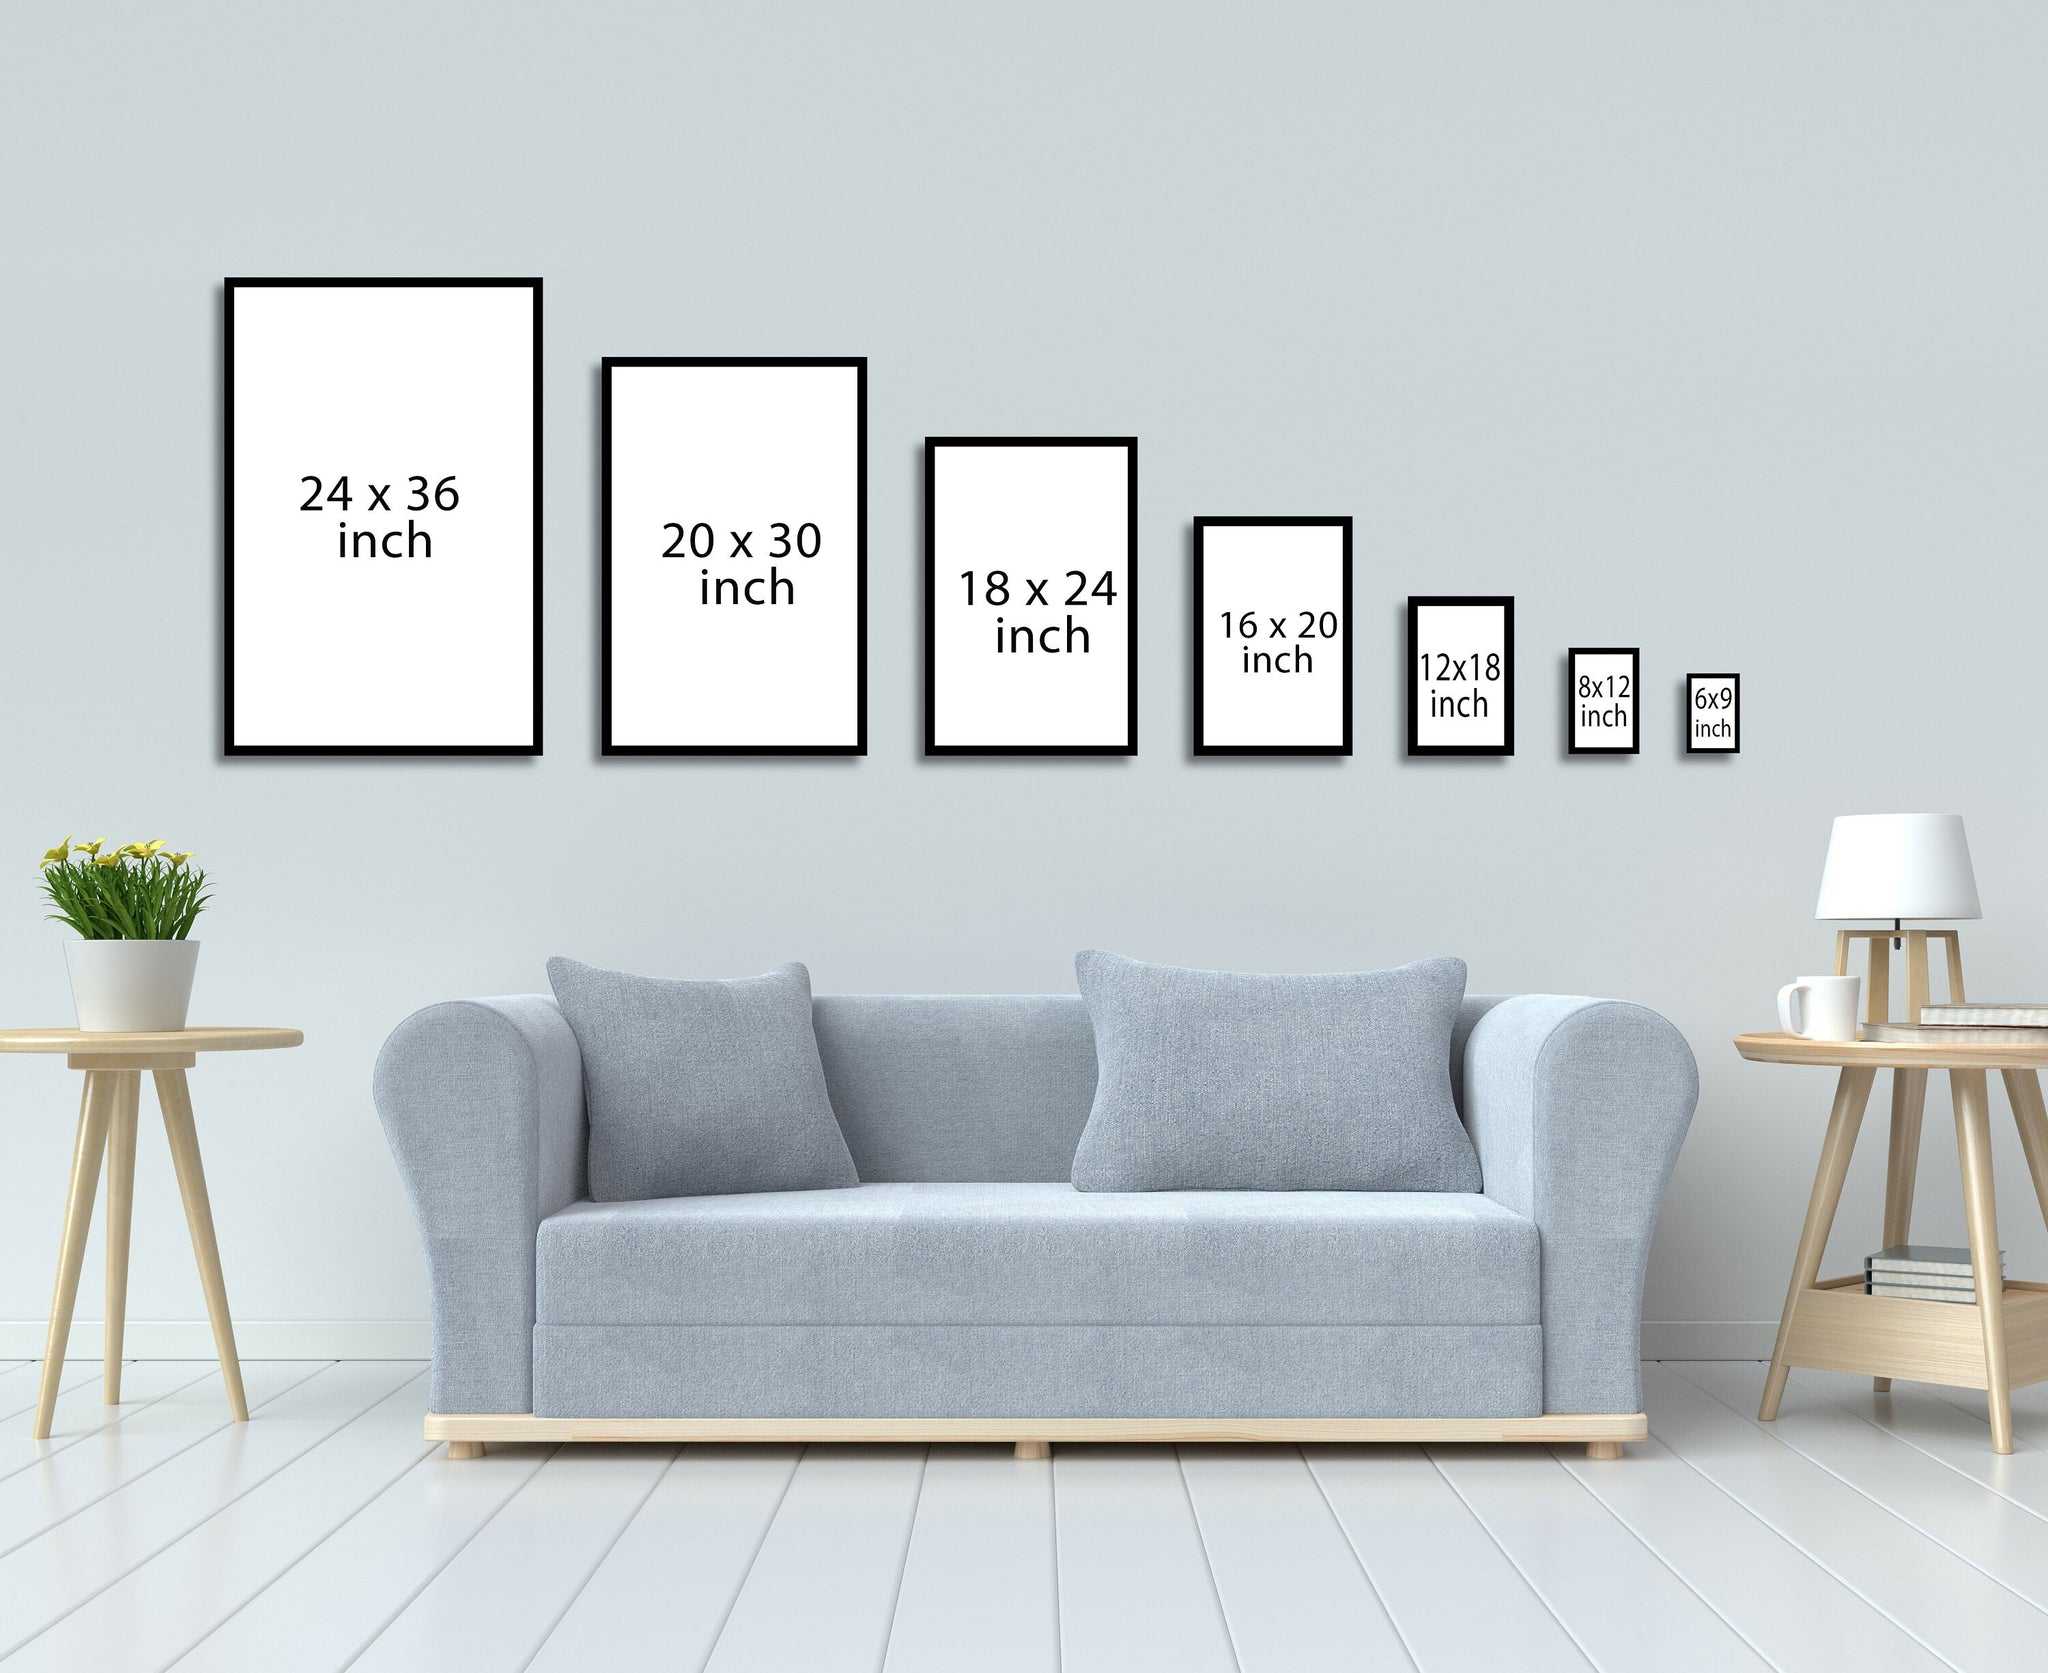 GYM TIME, Gym Posters, Gym Quotes, Poster Prints, Fitness Quotes, Fitness Decor, Home Wall Decor, Gym Wall Decor, Home Gym Wall Poster Decor